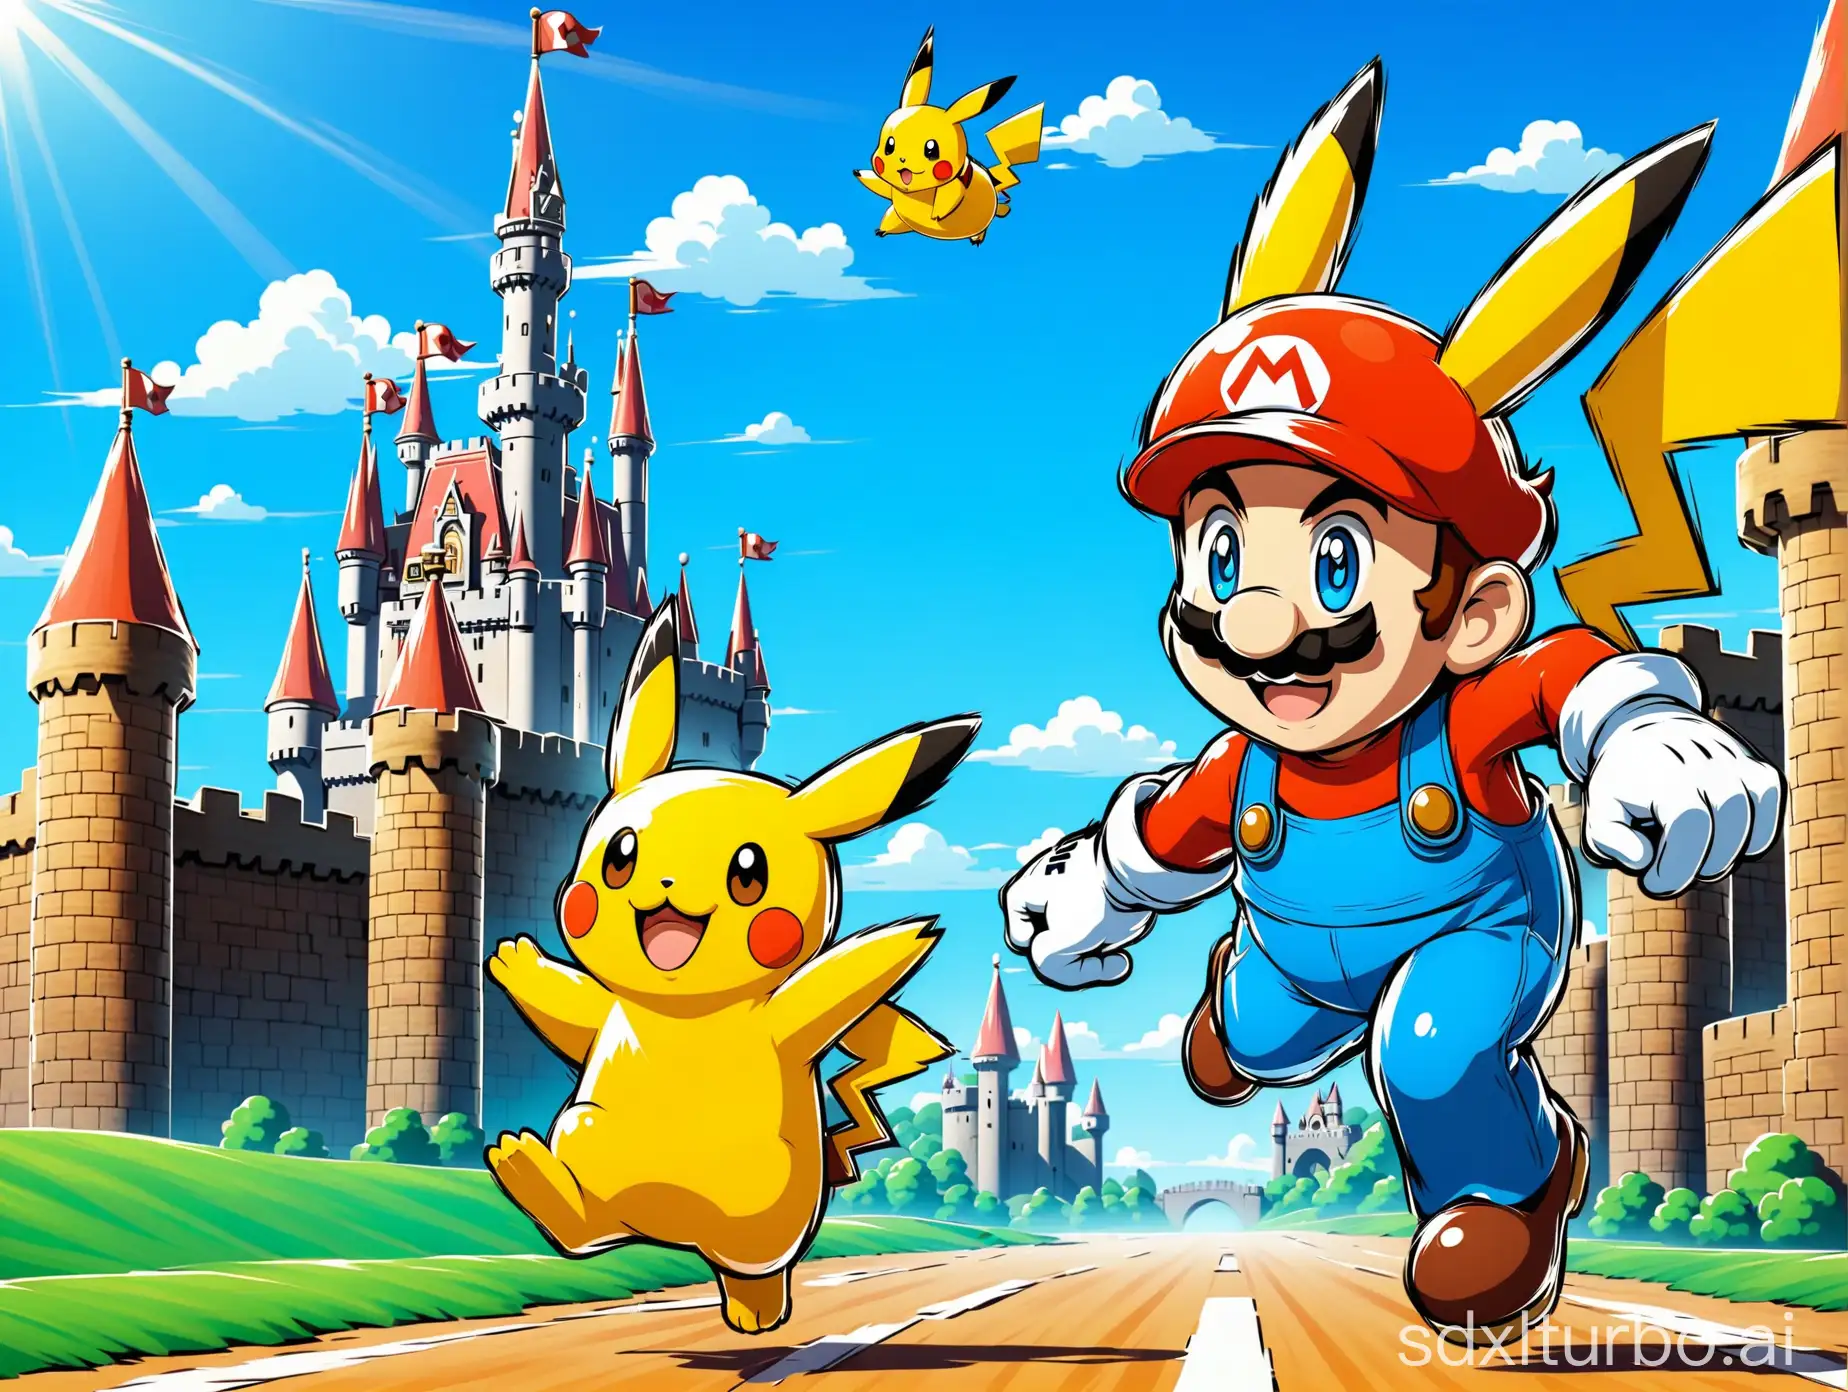 Adventure-Super-Mario-and-Pikachu-Rushing-to-Save-the-Princess-under-a-Blue-Sky